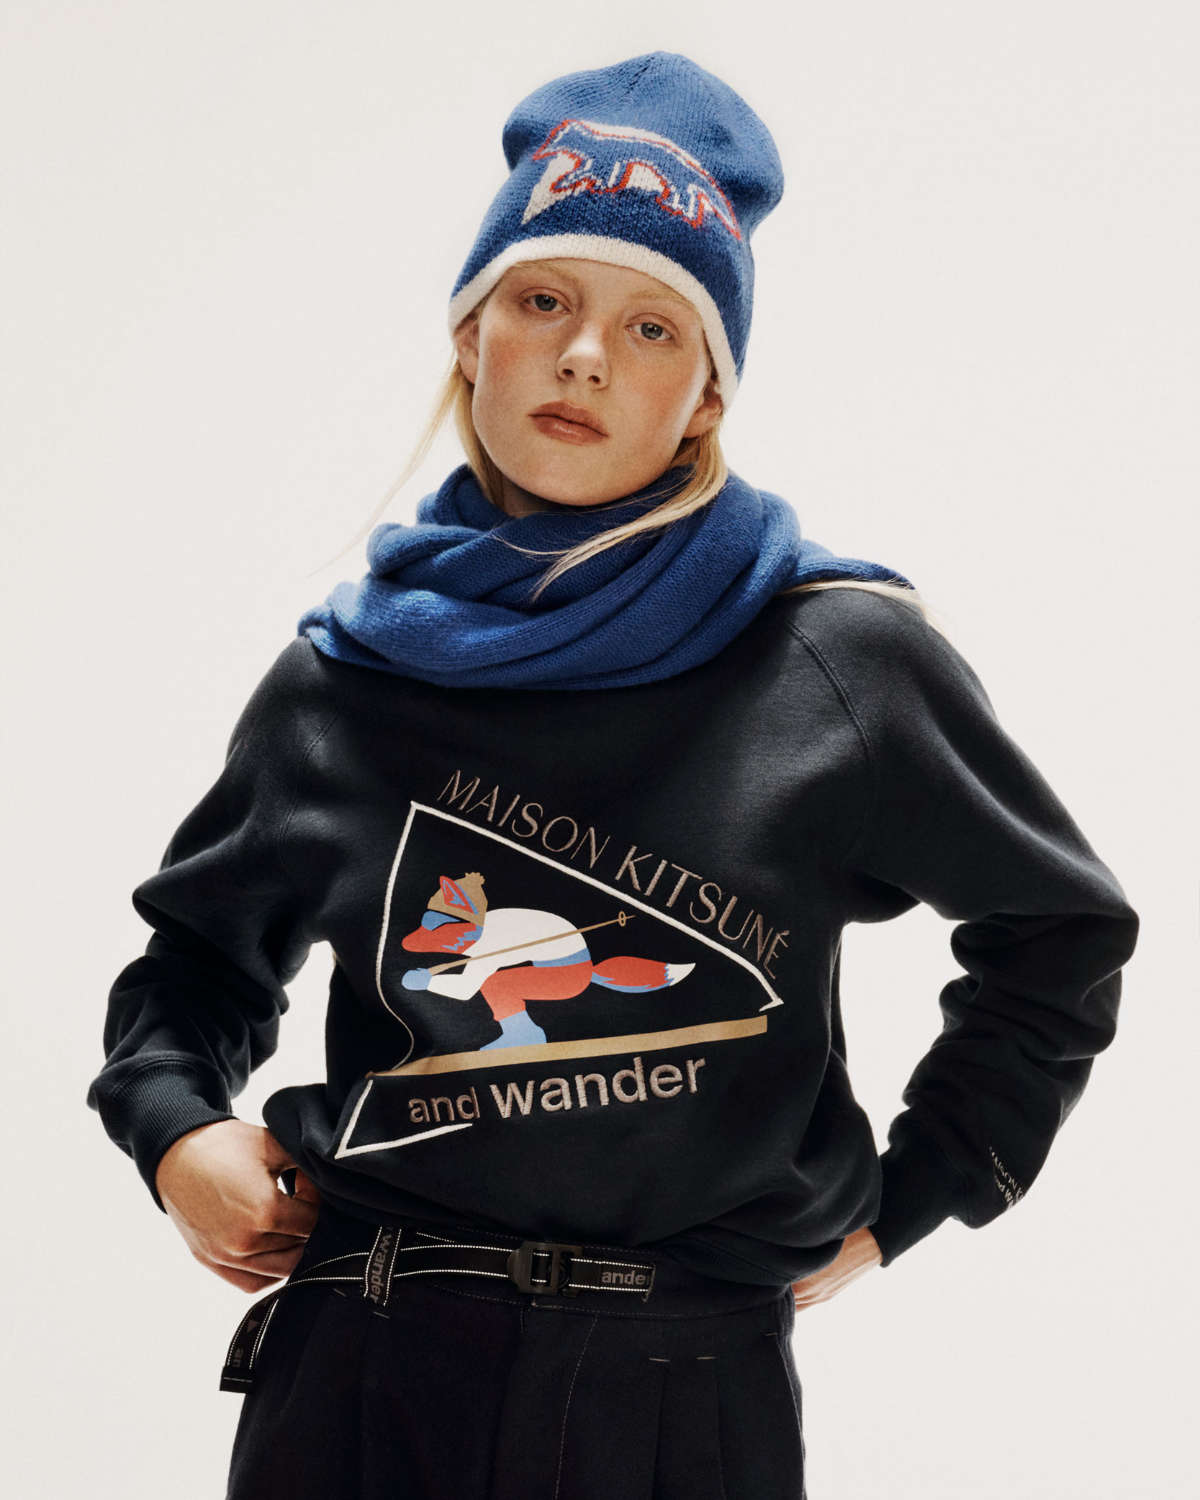 Maison Kitsuné Presents Its New Collaboration With And Wander: Le Chalet